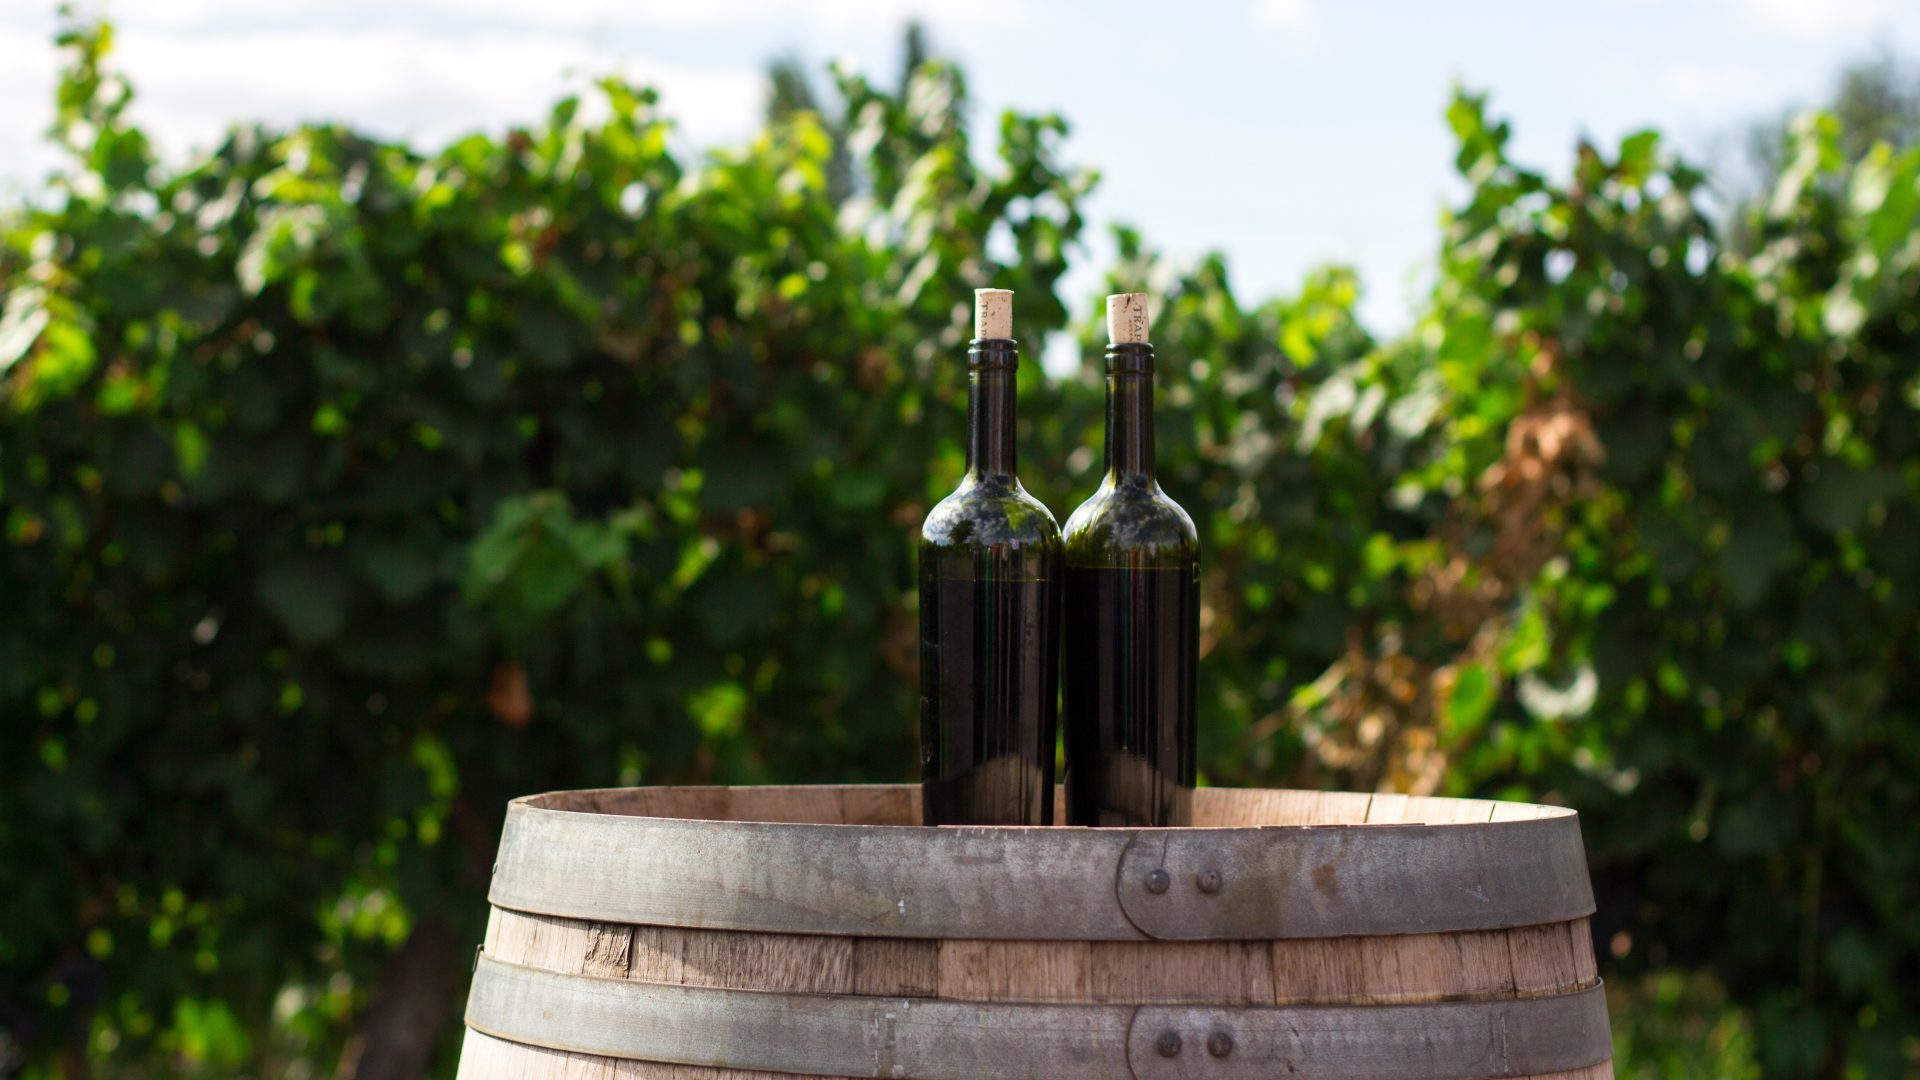 Two bottles of wine sitting on top of a wine barrel, greenery in the background